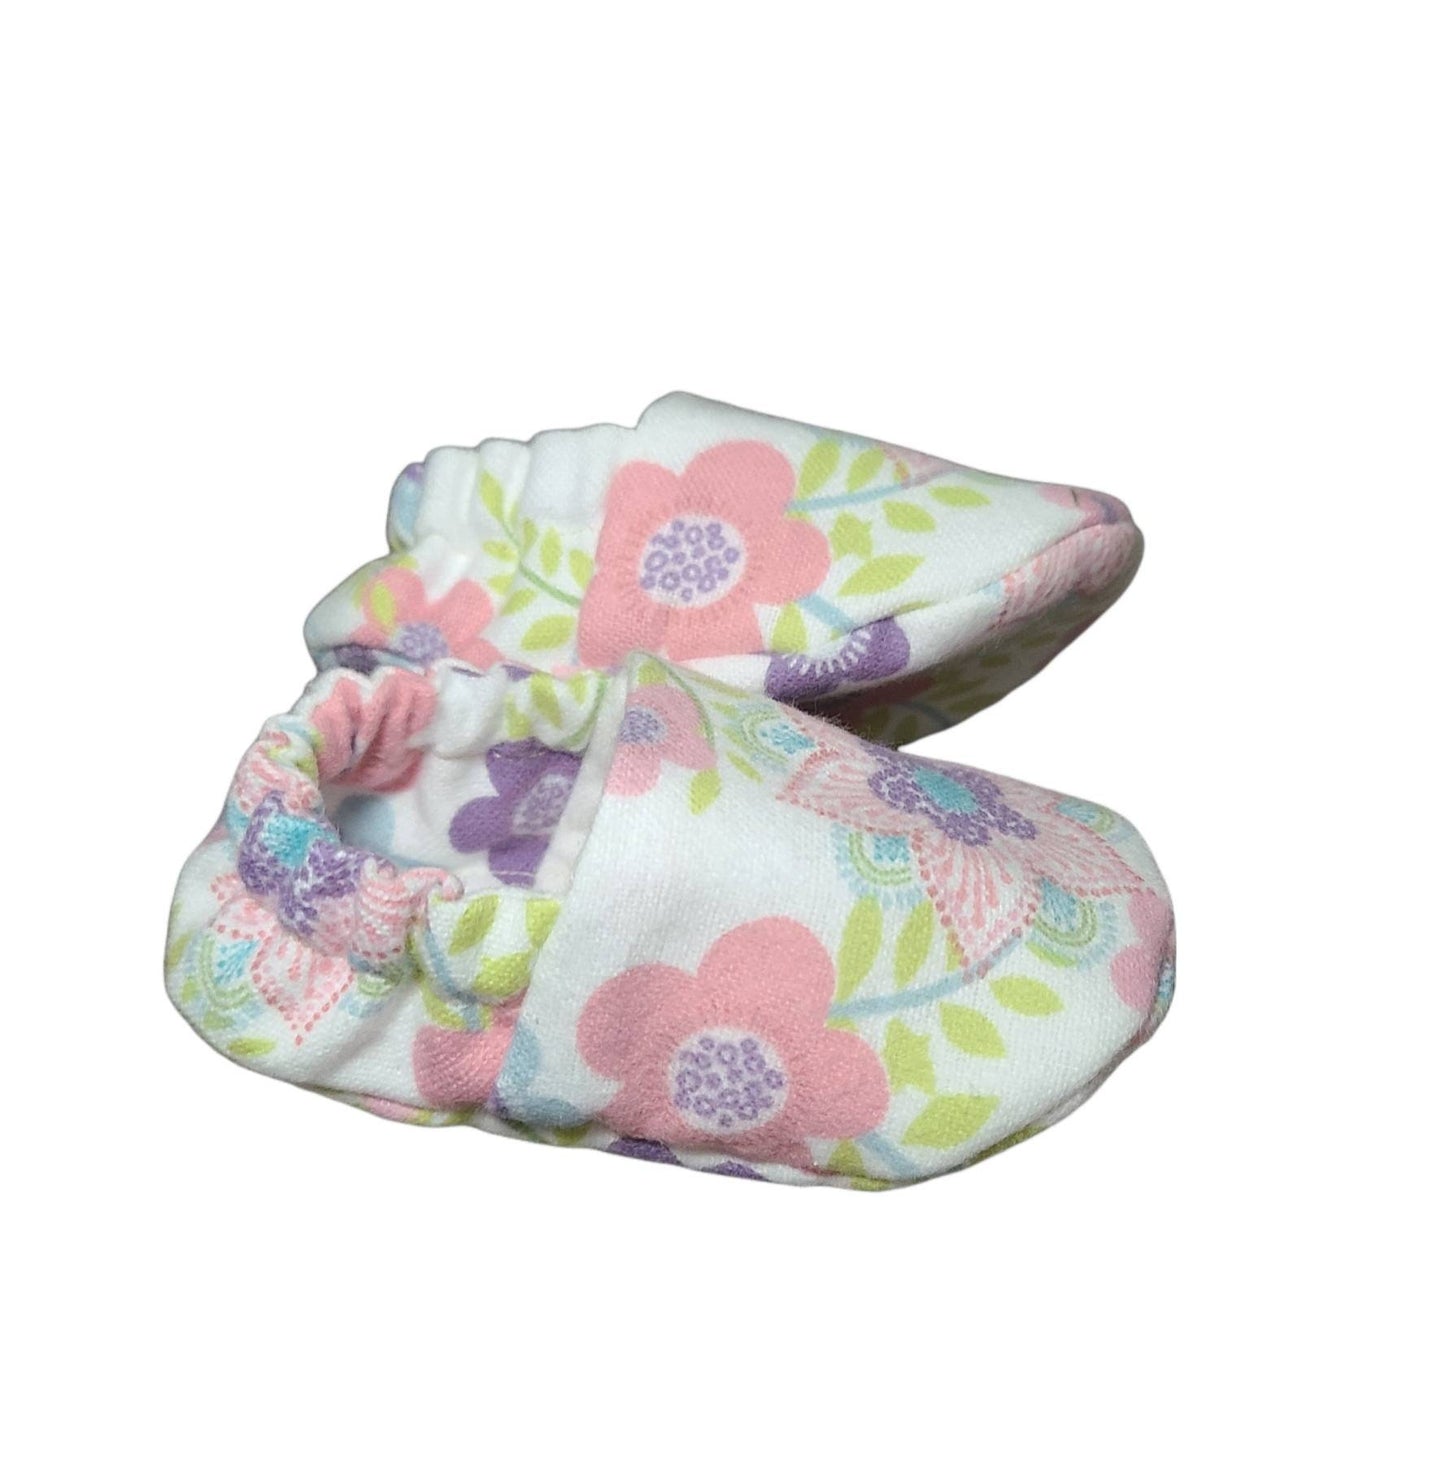 Floral Baby Shoes, Baby Girl Slipper, Floral Crib Shoes, Floral Baby Moccs, Floral Baby Slippers, Flowered Baby Slippers, Baby Girl Shoes